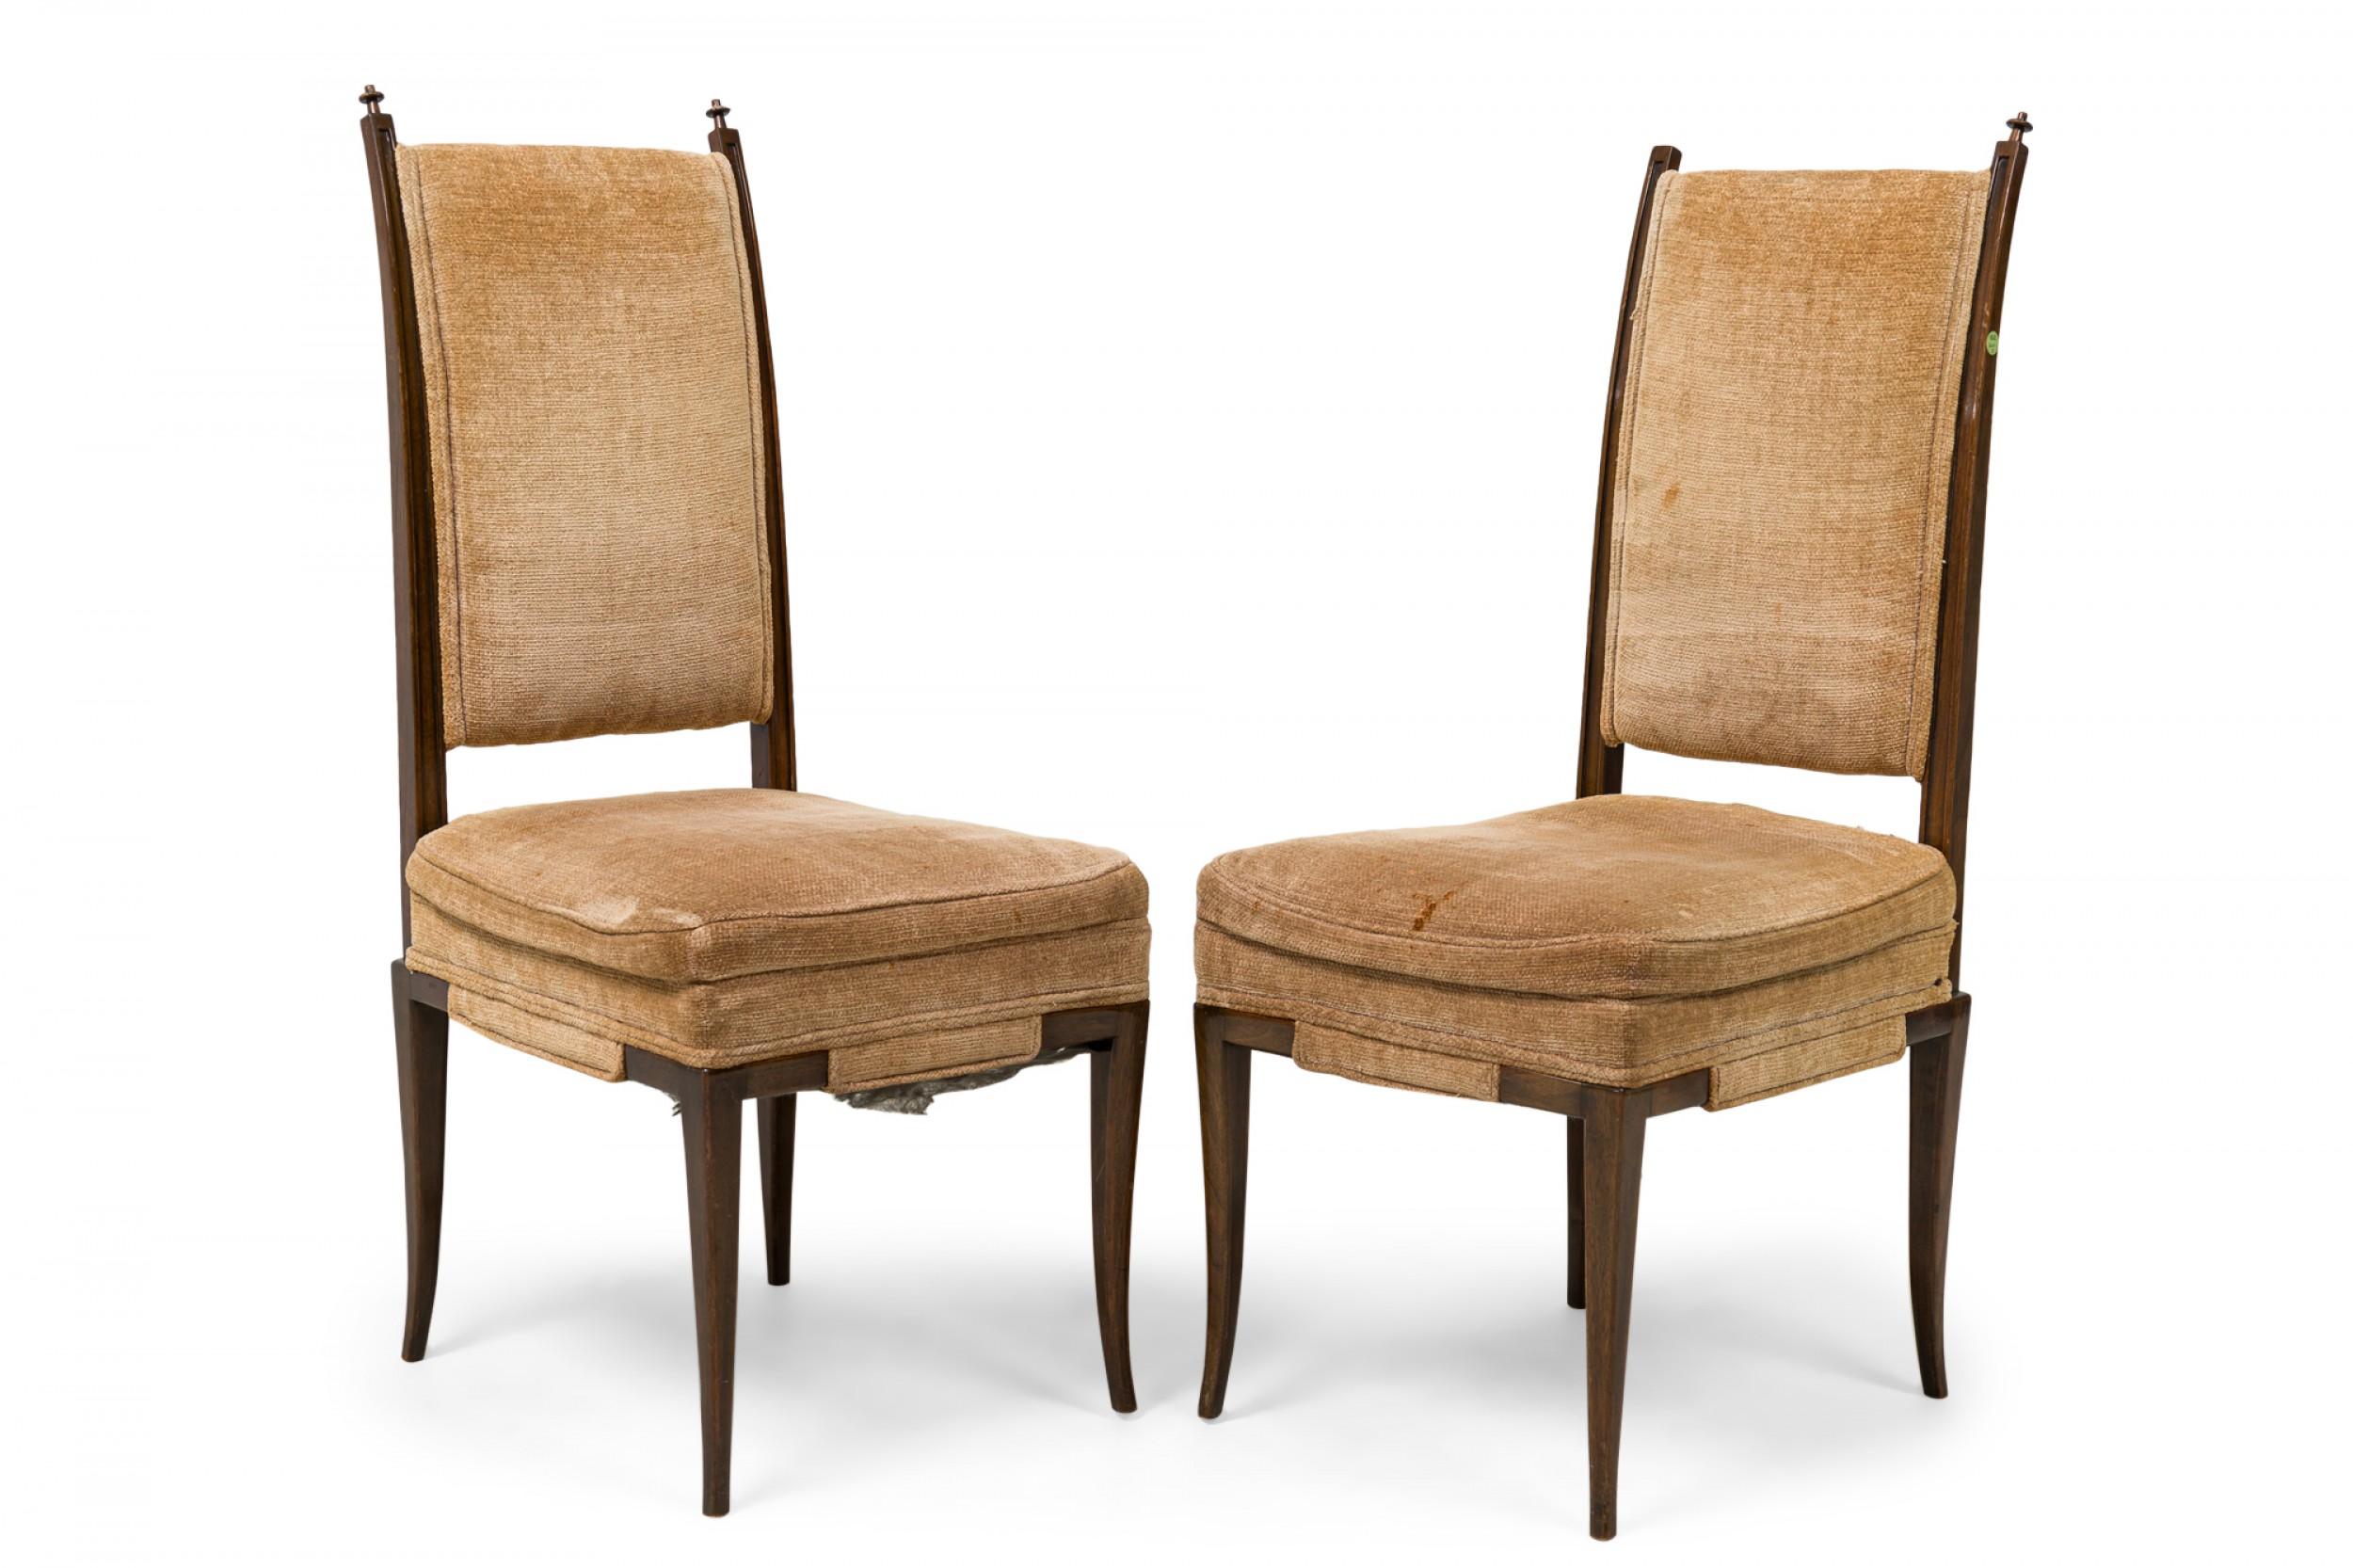 SET of 8 midcentury American lacquered mahogany dining chairs (2 armchairs, 6 side chairs) with high sloping backs and spindle finials, double padded seats and armrests upholstered in beige chenille tweed, center grips along the front and sides,